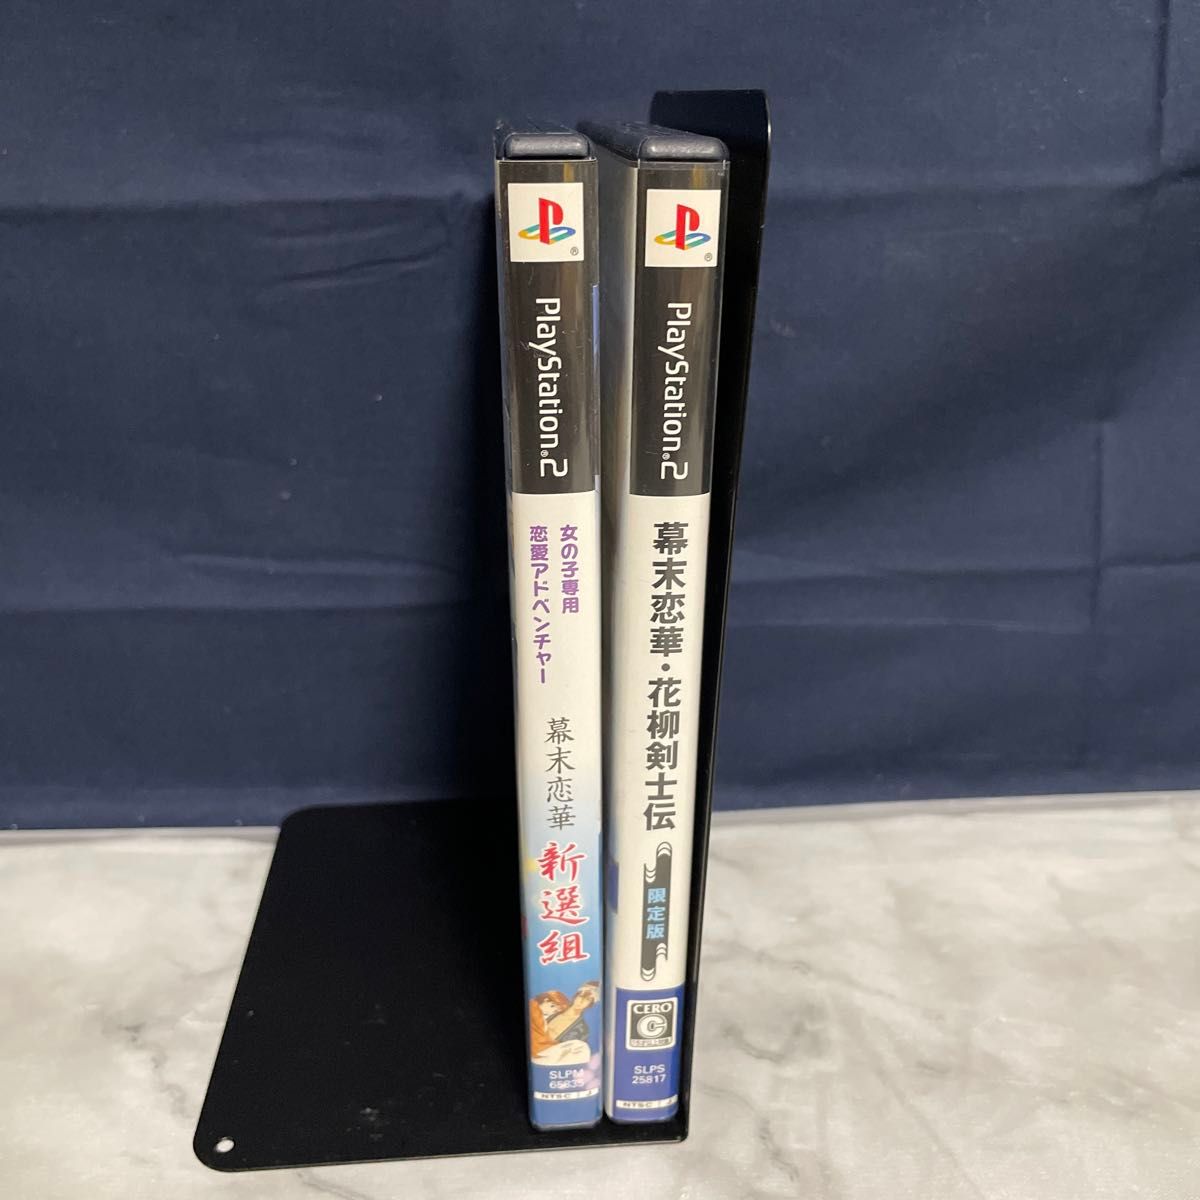 【PS2】 幕末恋華　まとめ売り